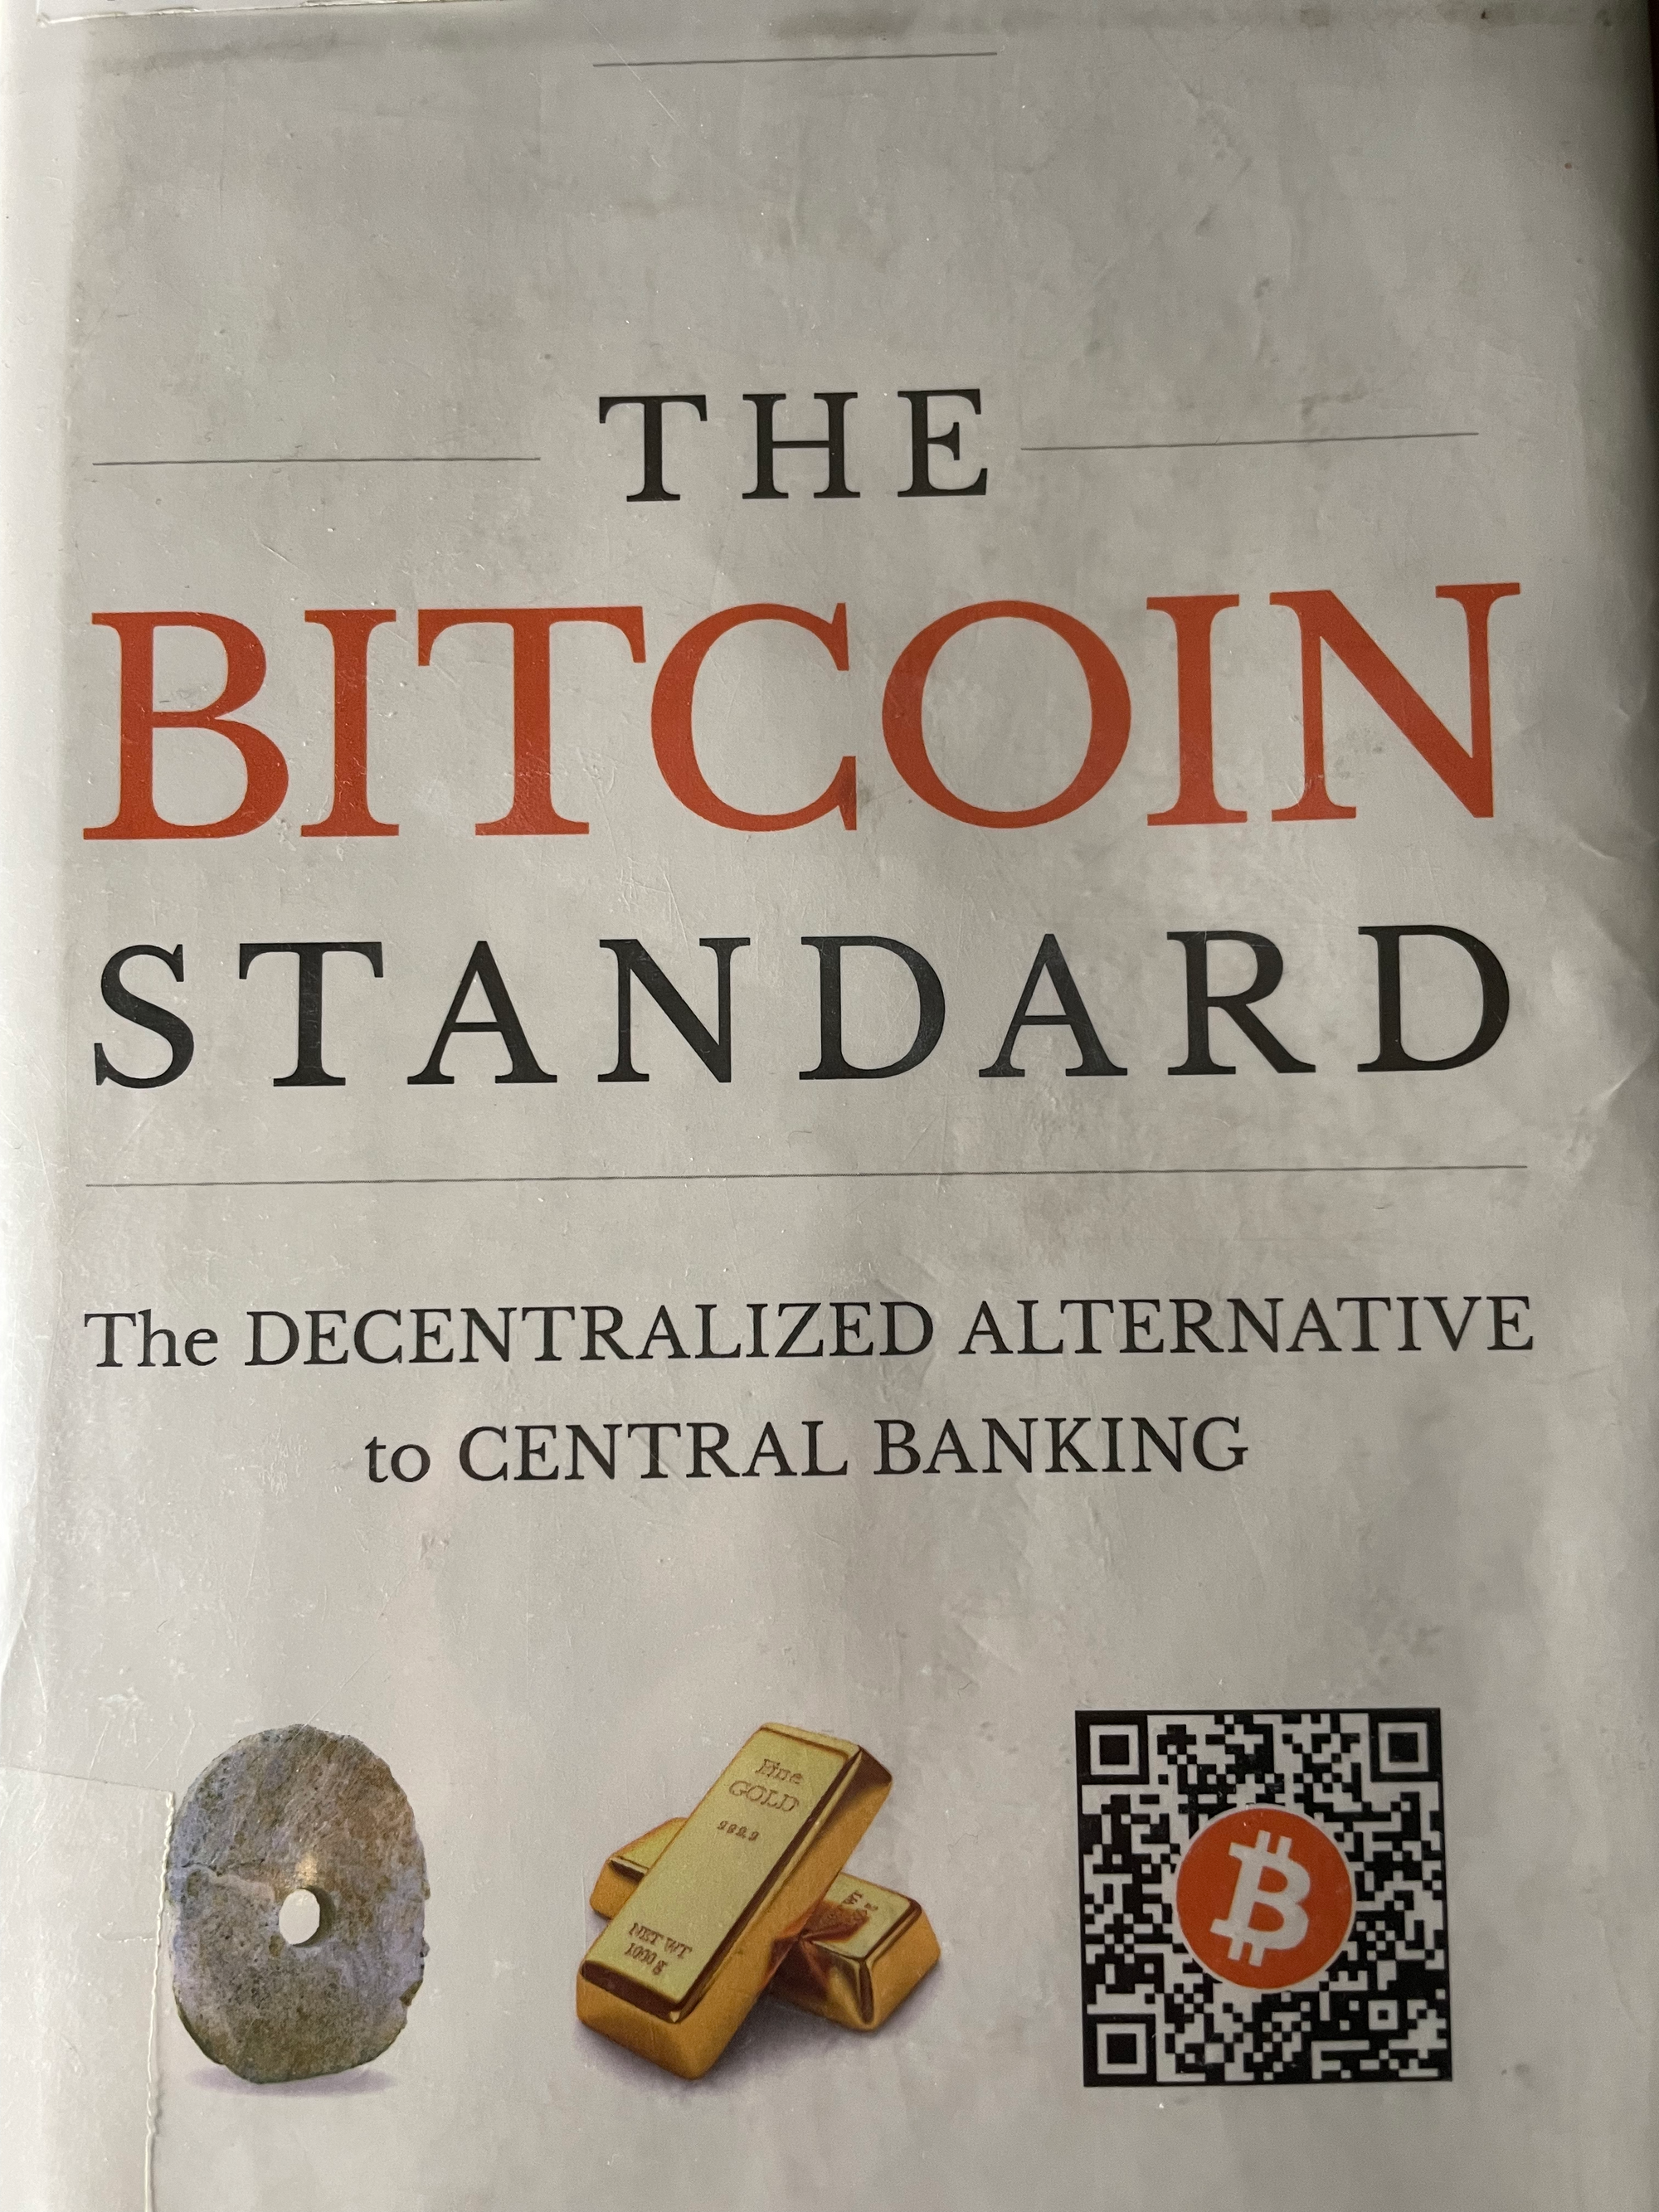 The Bitcoin Standard - Book Review